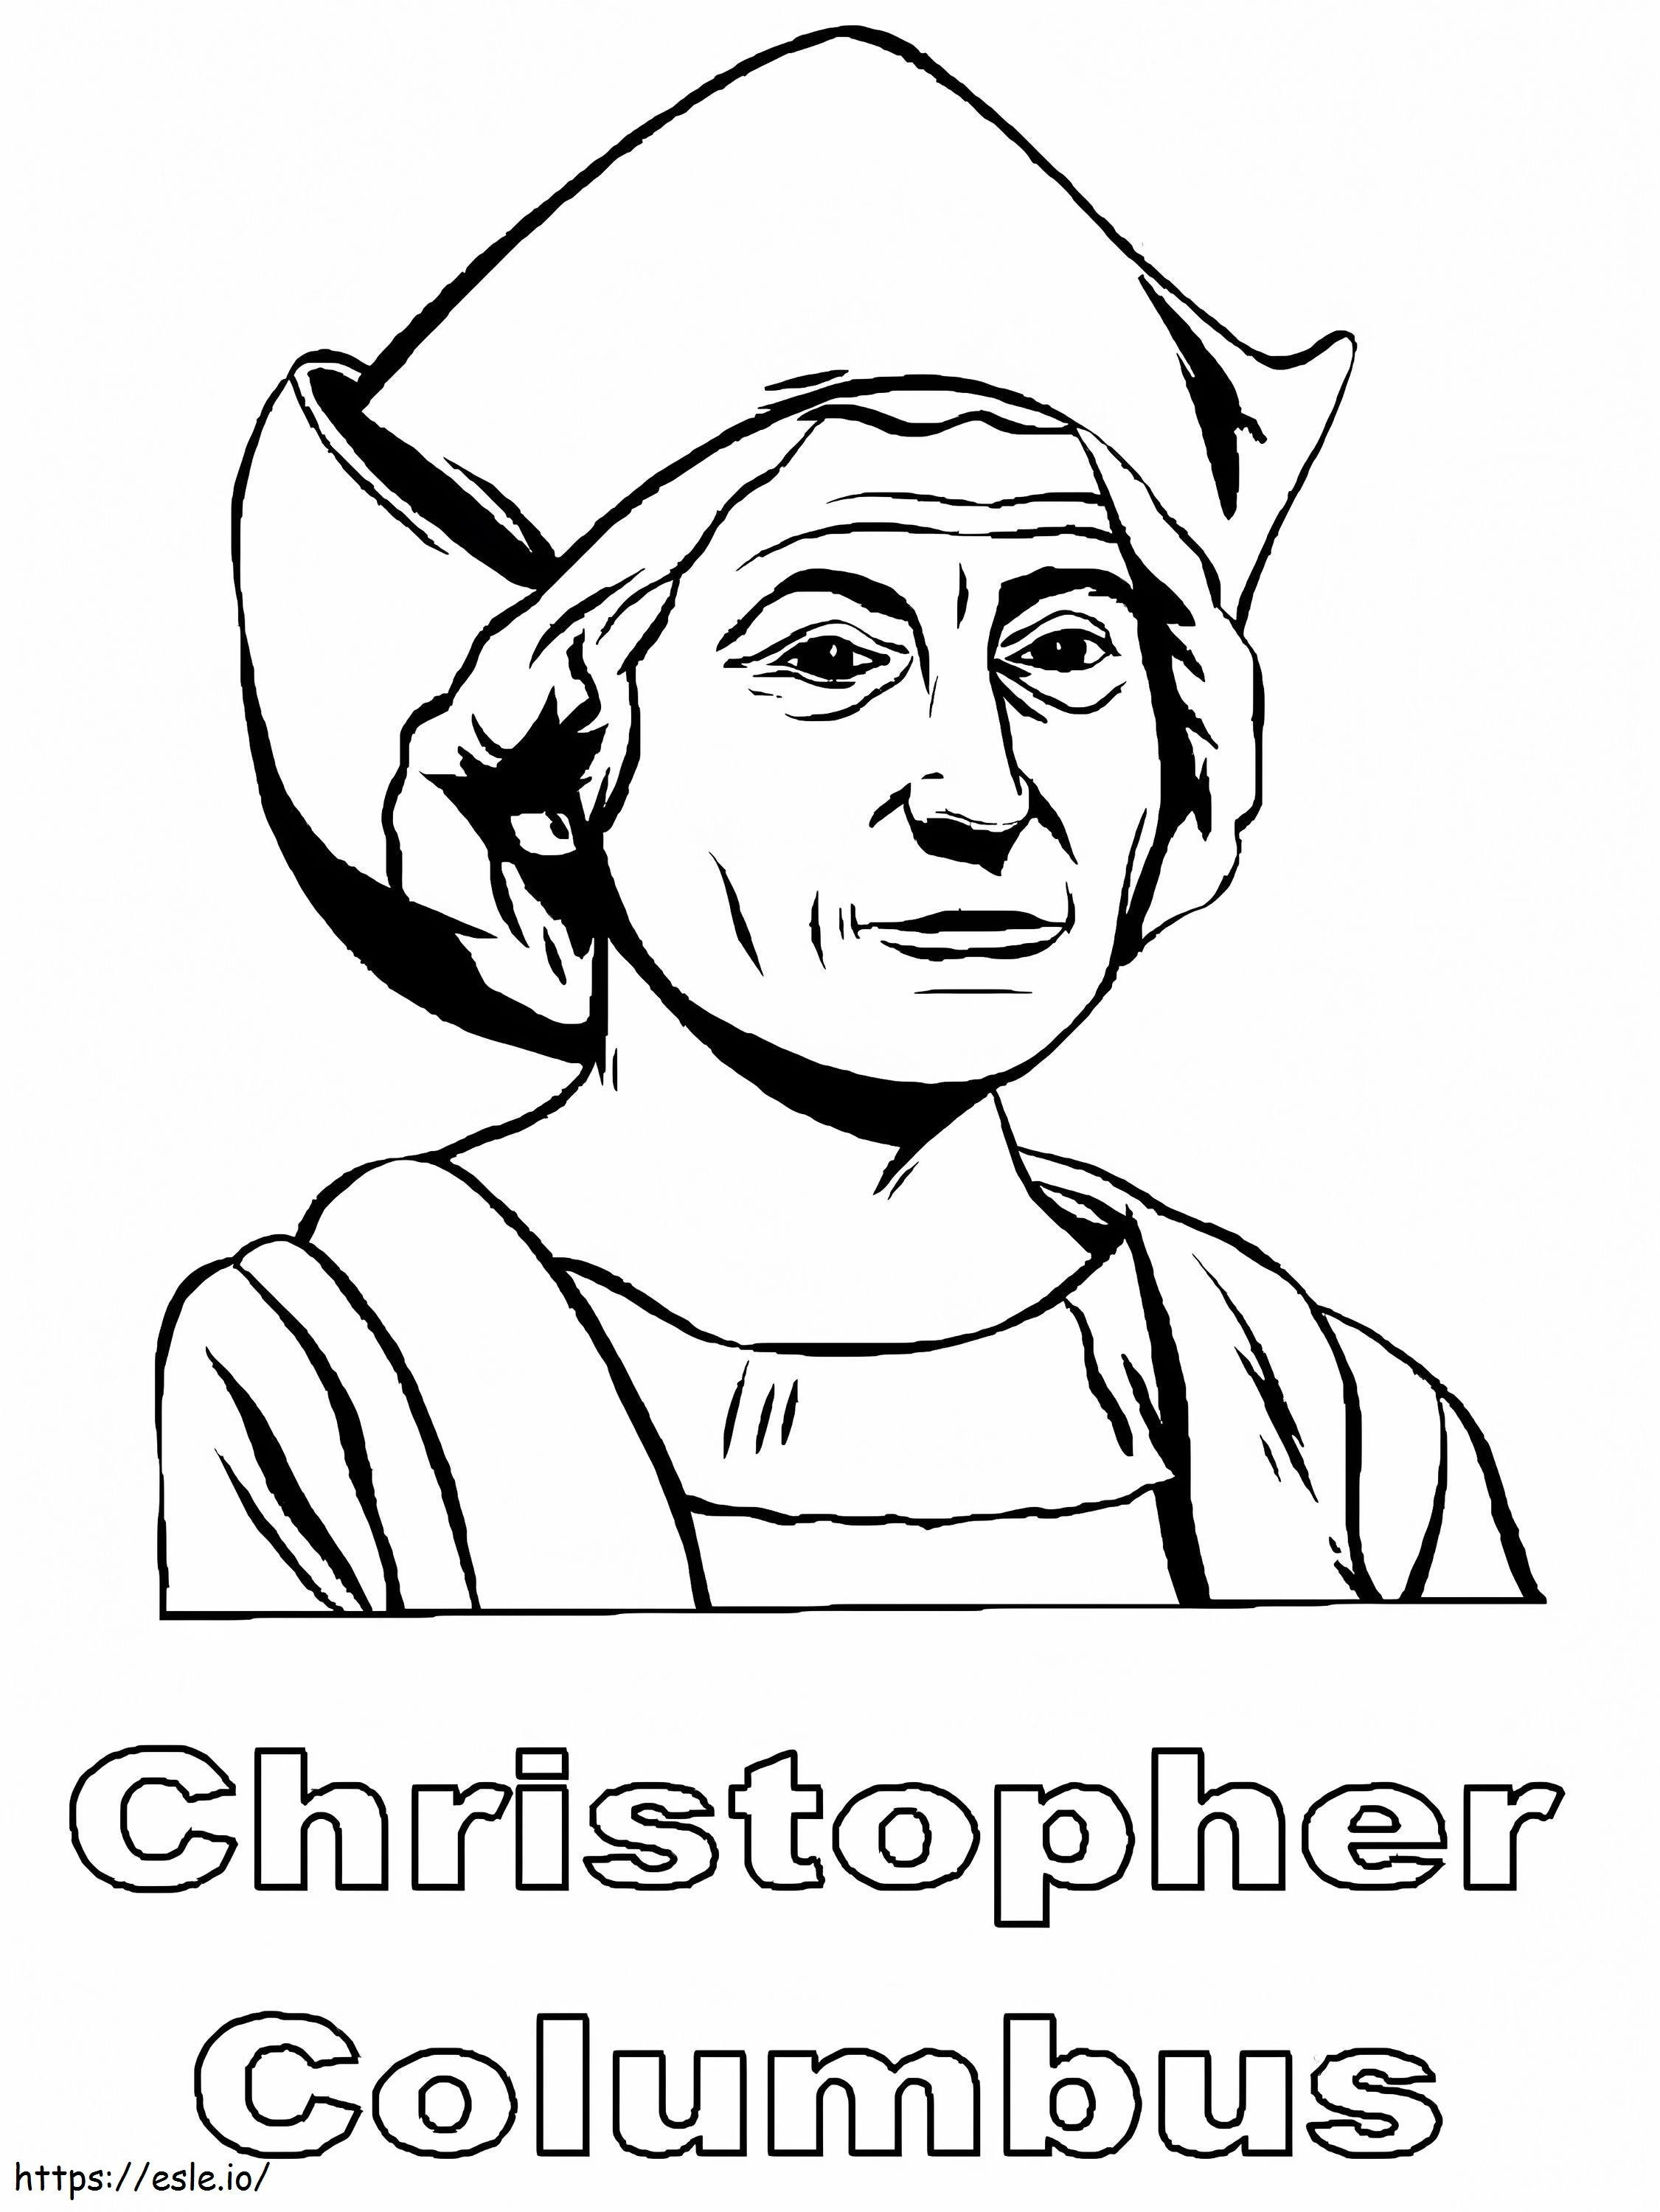 Christopher Columbus 15 coloring page